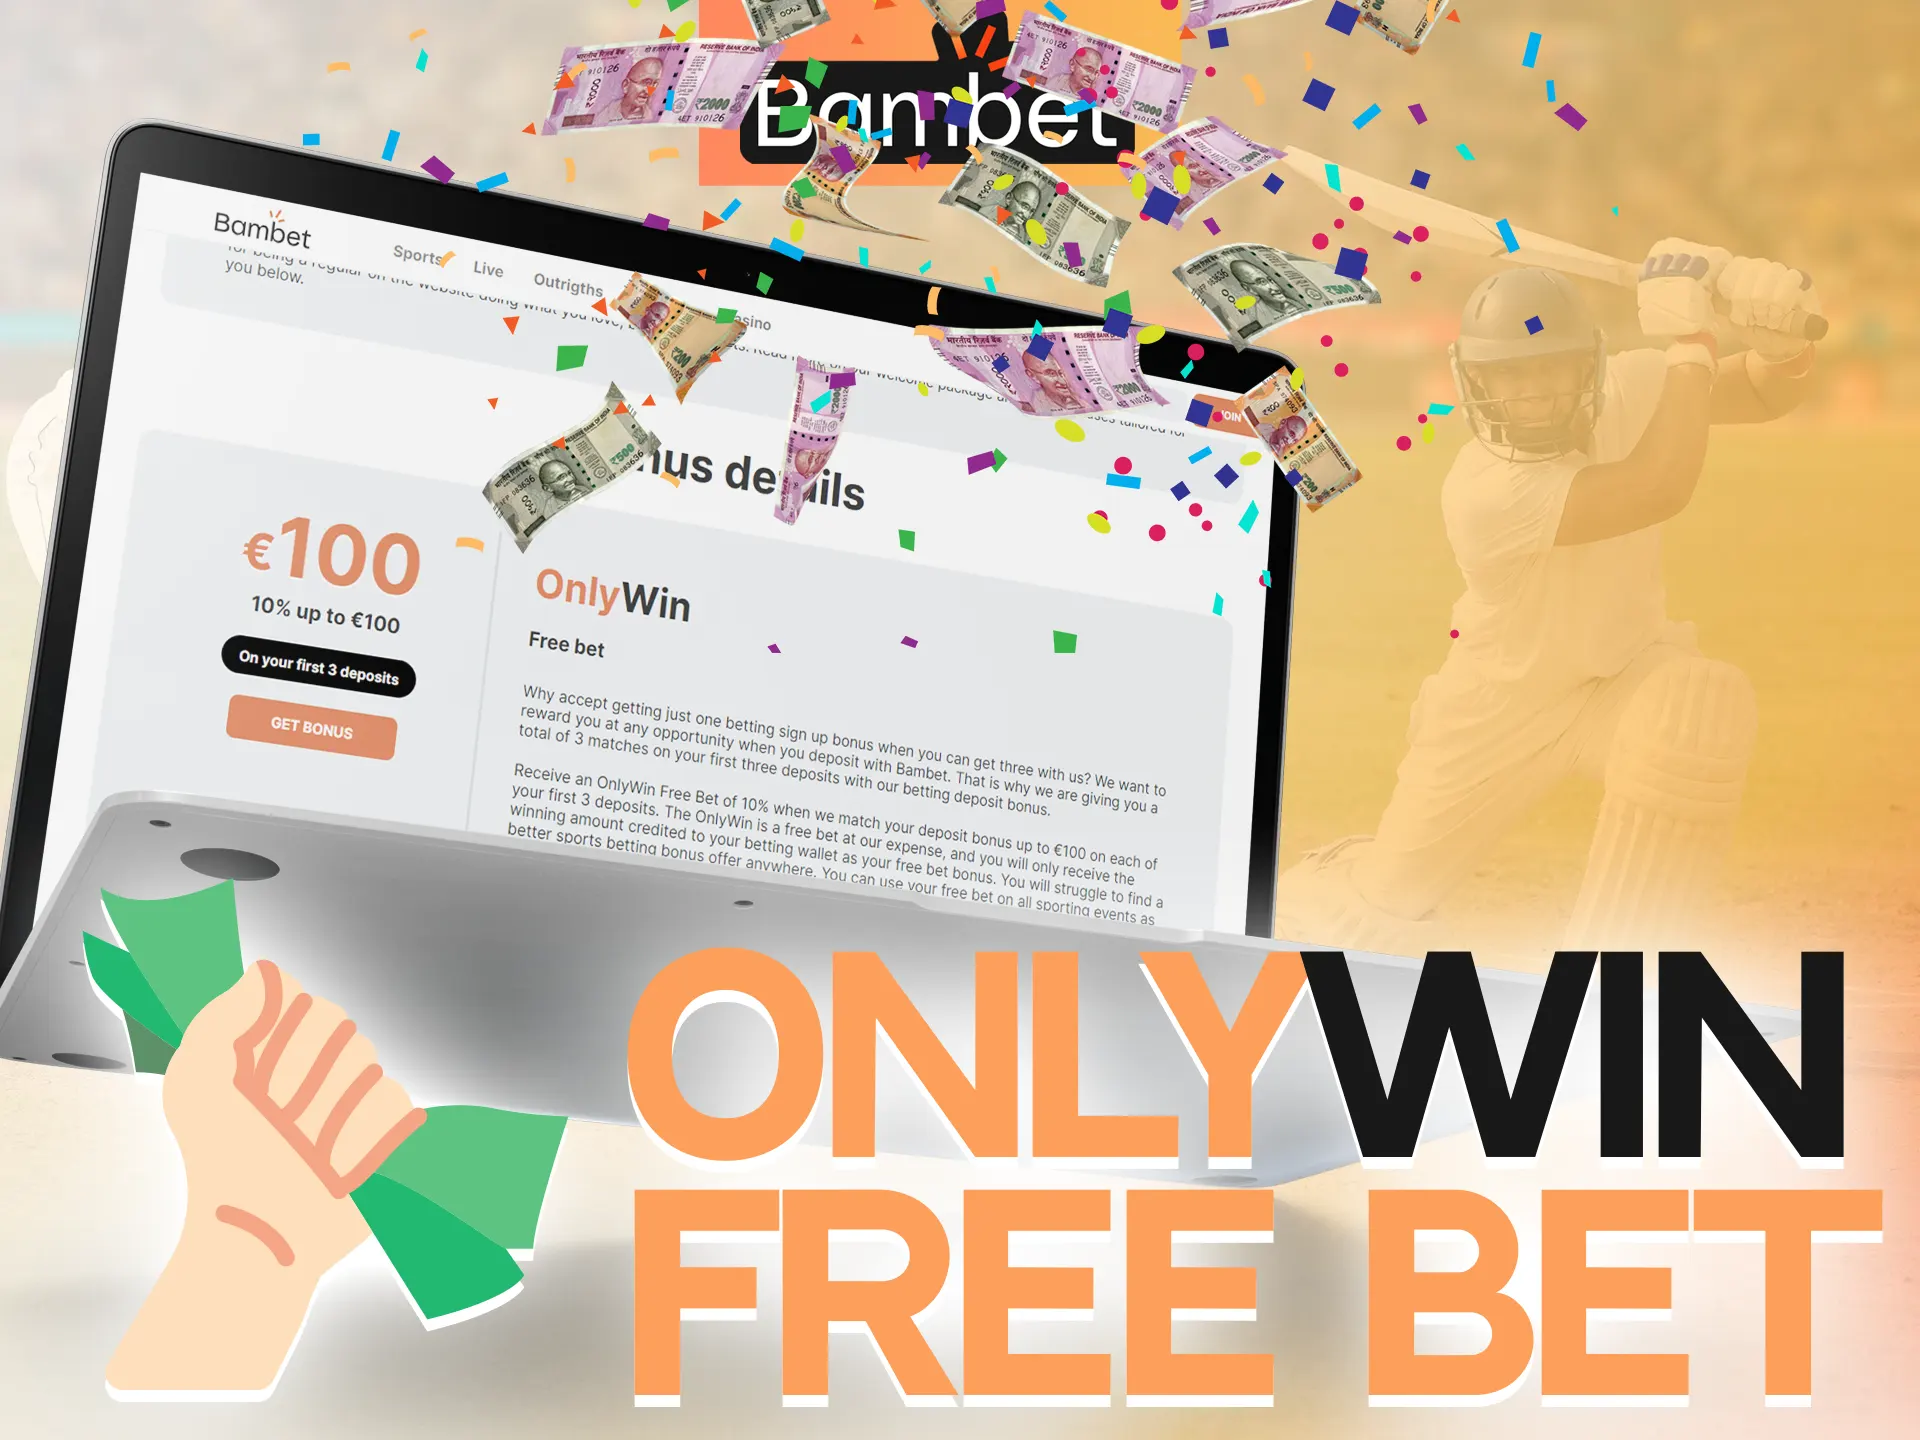 Use the OnlyWin bonus from Bambet.